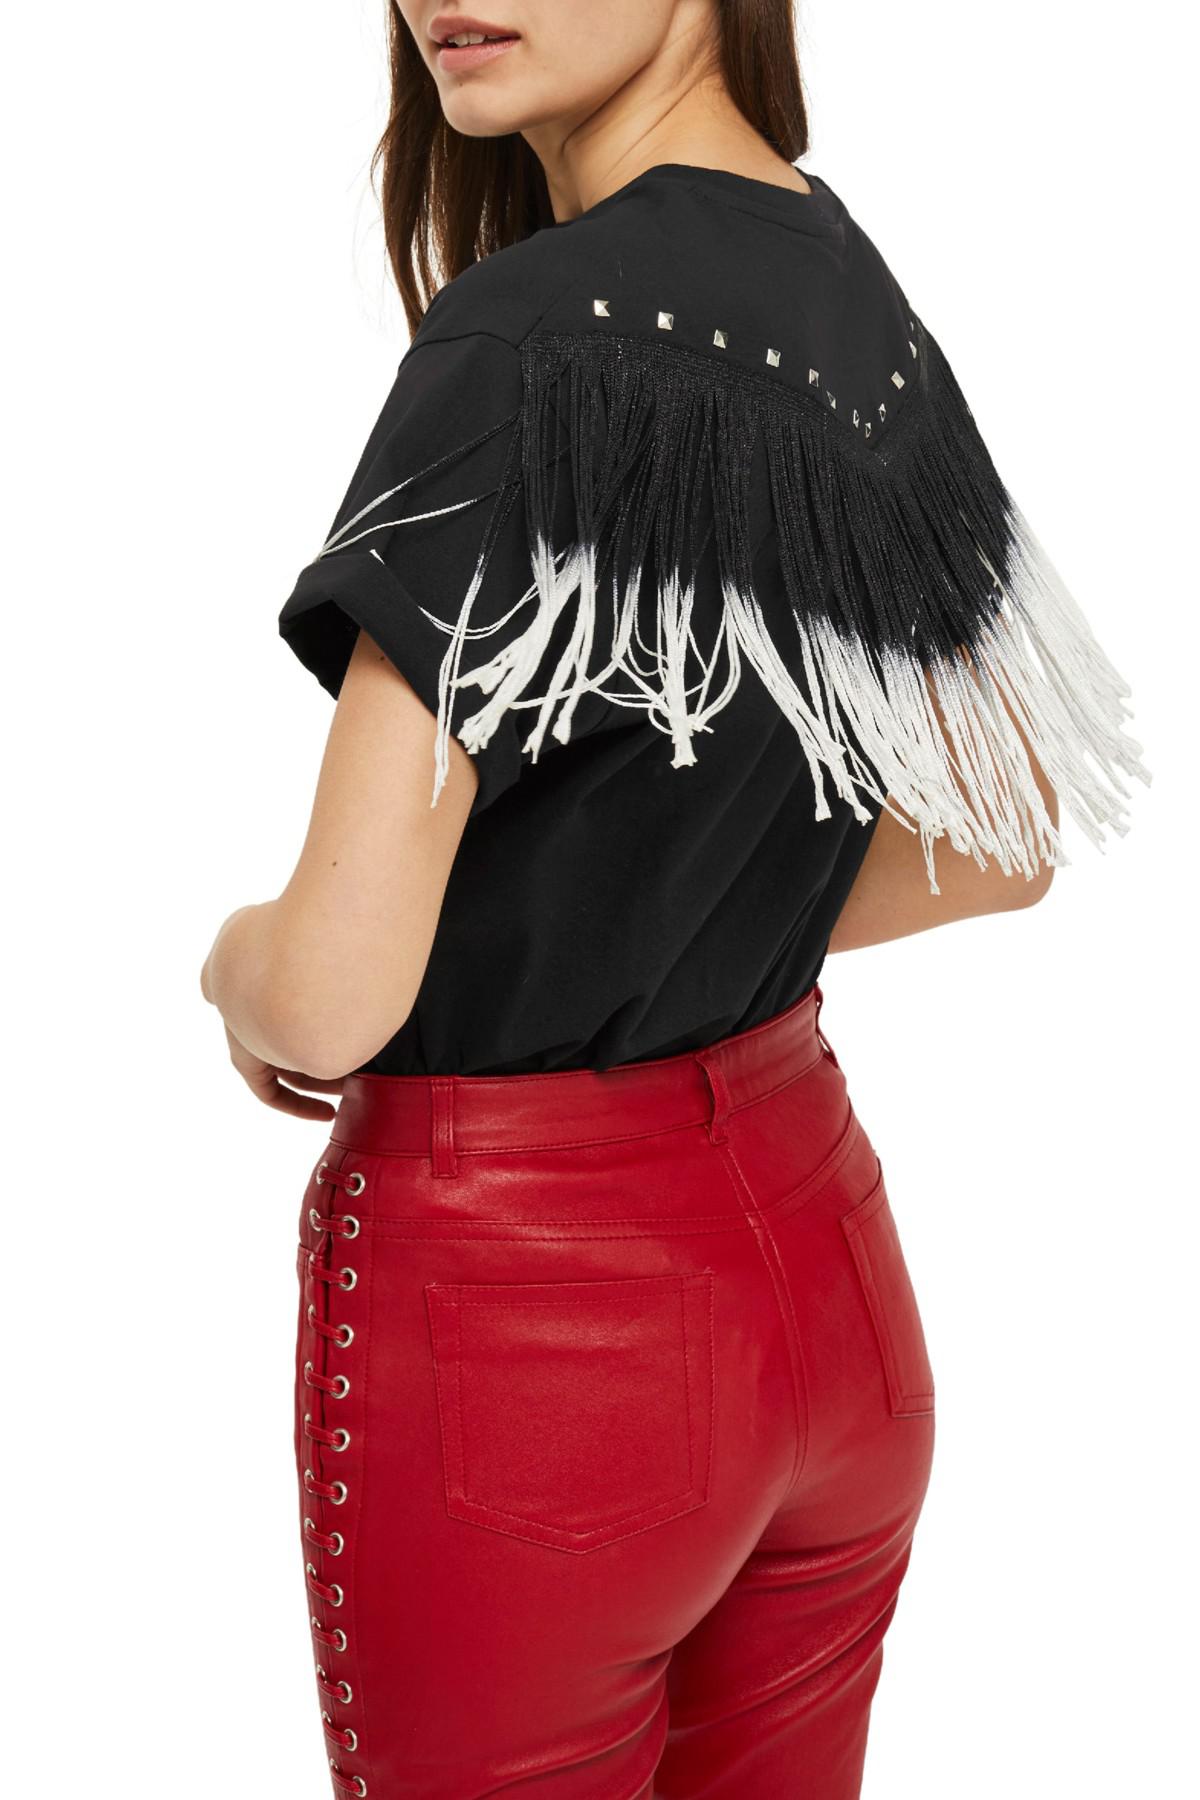 TOPSHOP By And Finally Johnny Cash Fringe Tee in Black | Lyst